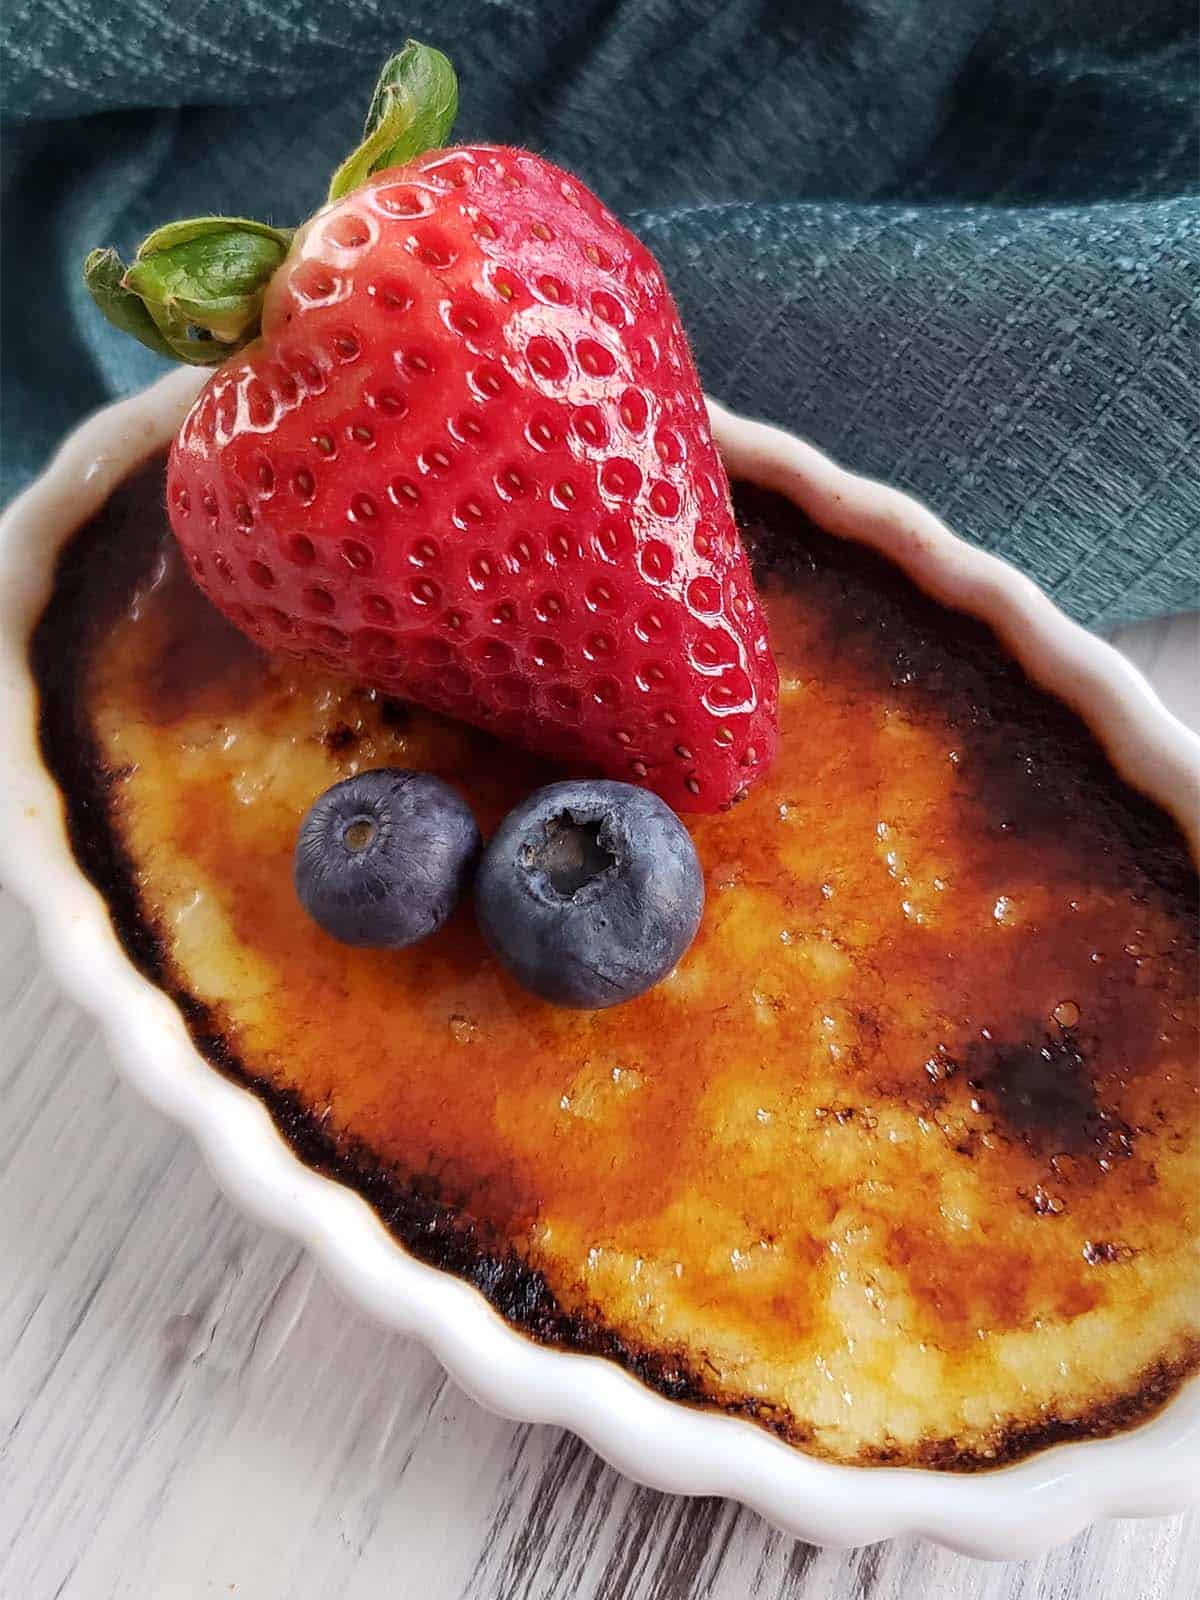 Creme brulee topped with a strawberry and two blueberries on a white surface next to a blue towel.